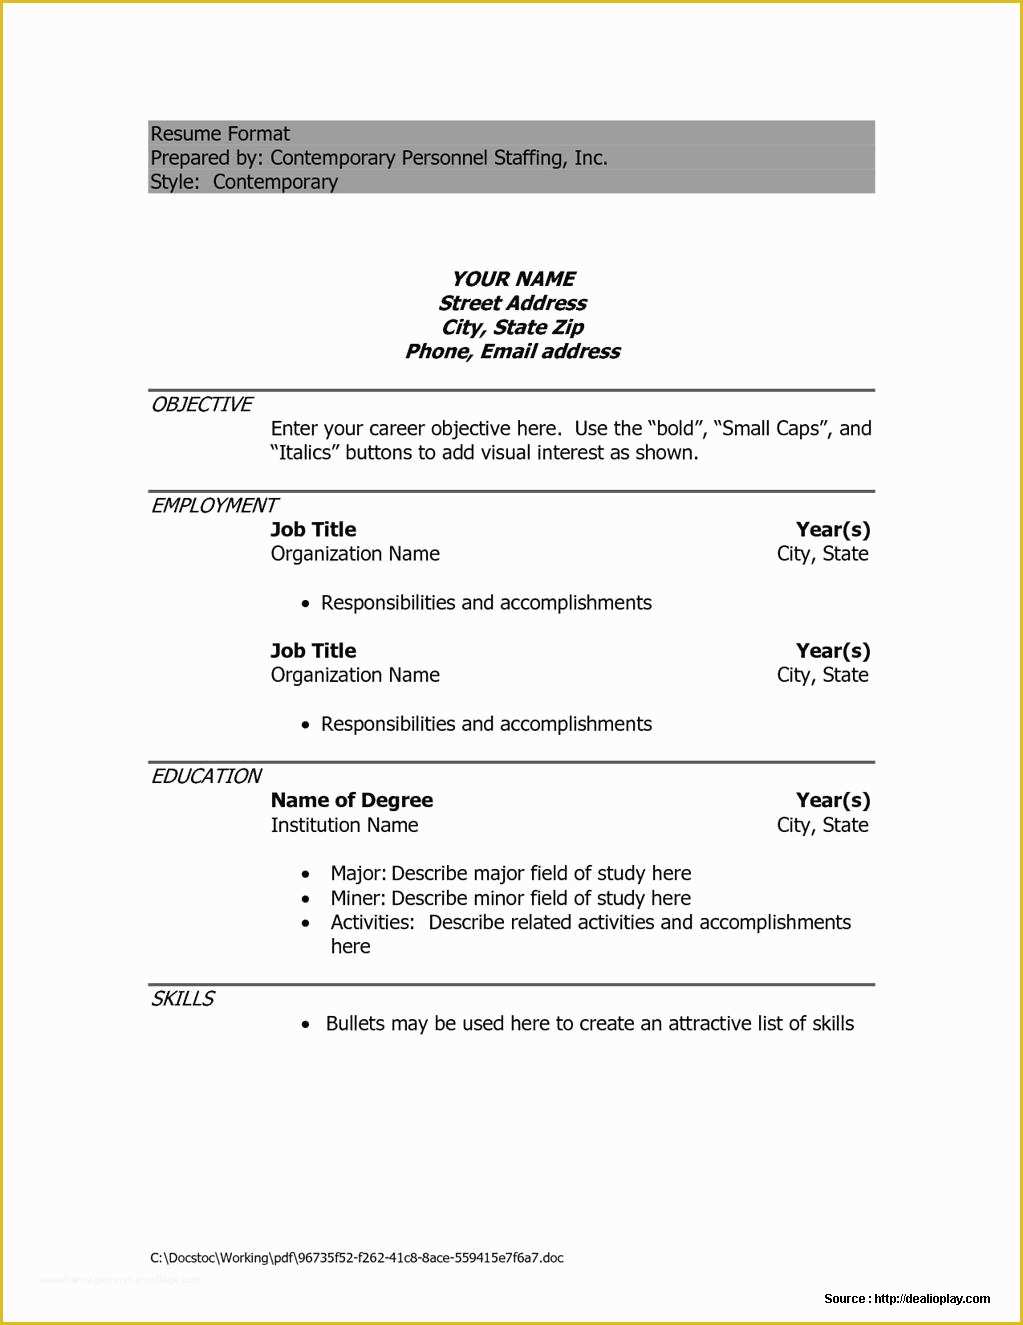 Attractive Resume Templates Free Download Of attractive Resume Templates Free Download Doc Resume